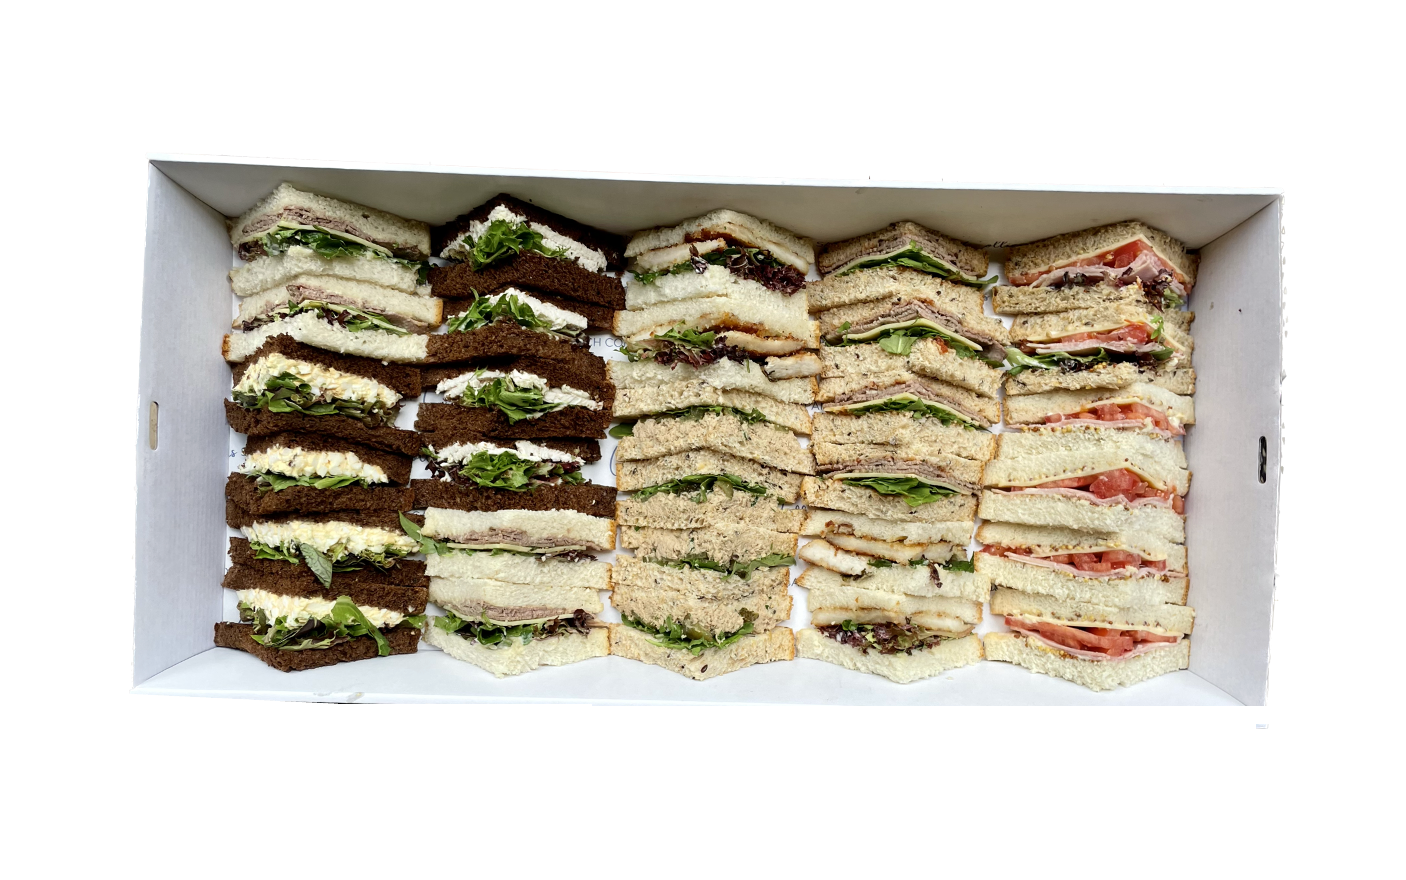 Corporate catering sandwiches